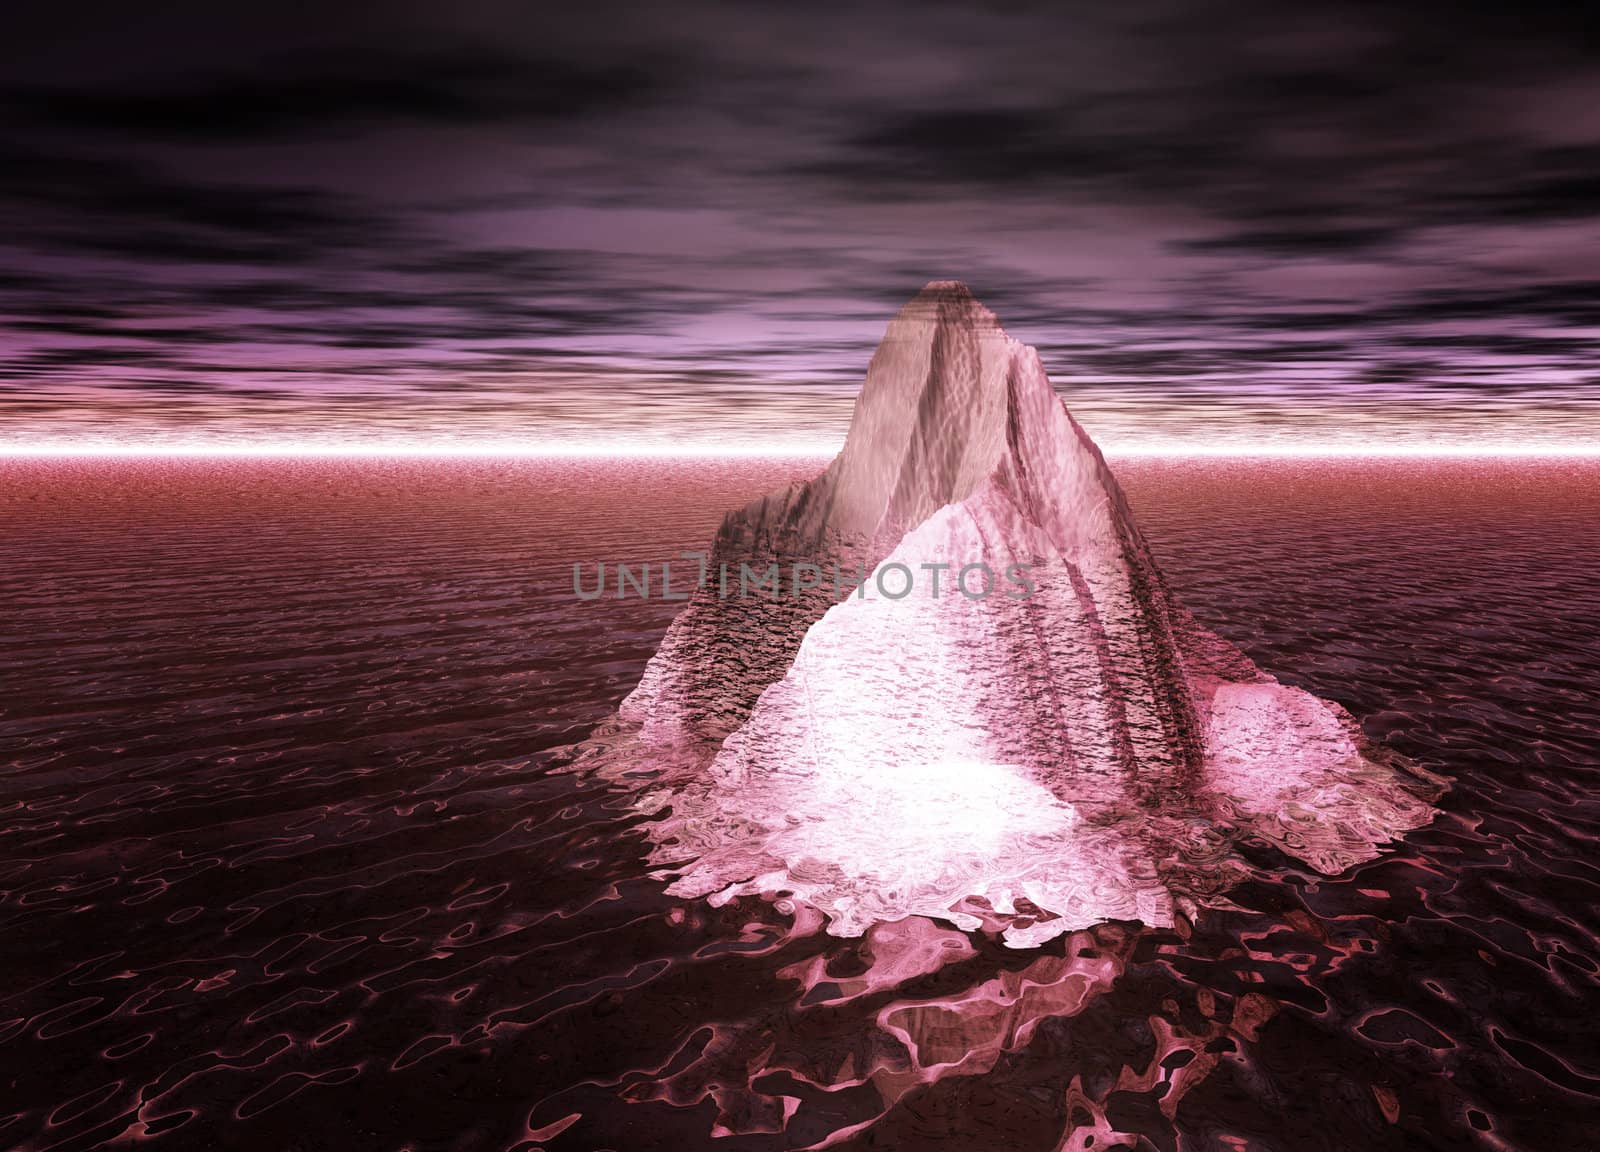 Iceberg Floating on a Red Ocean With Sky on Mars Fantasy Illustr by bobbigmac